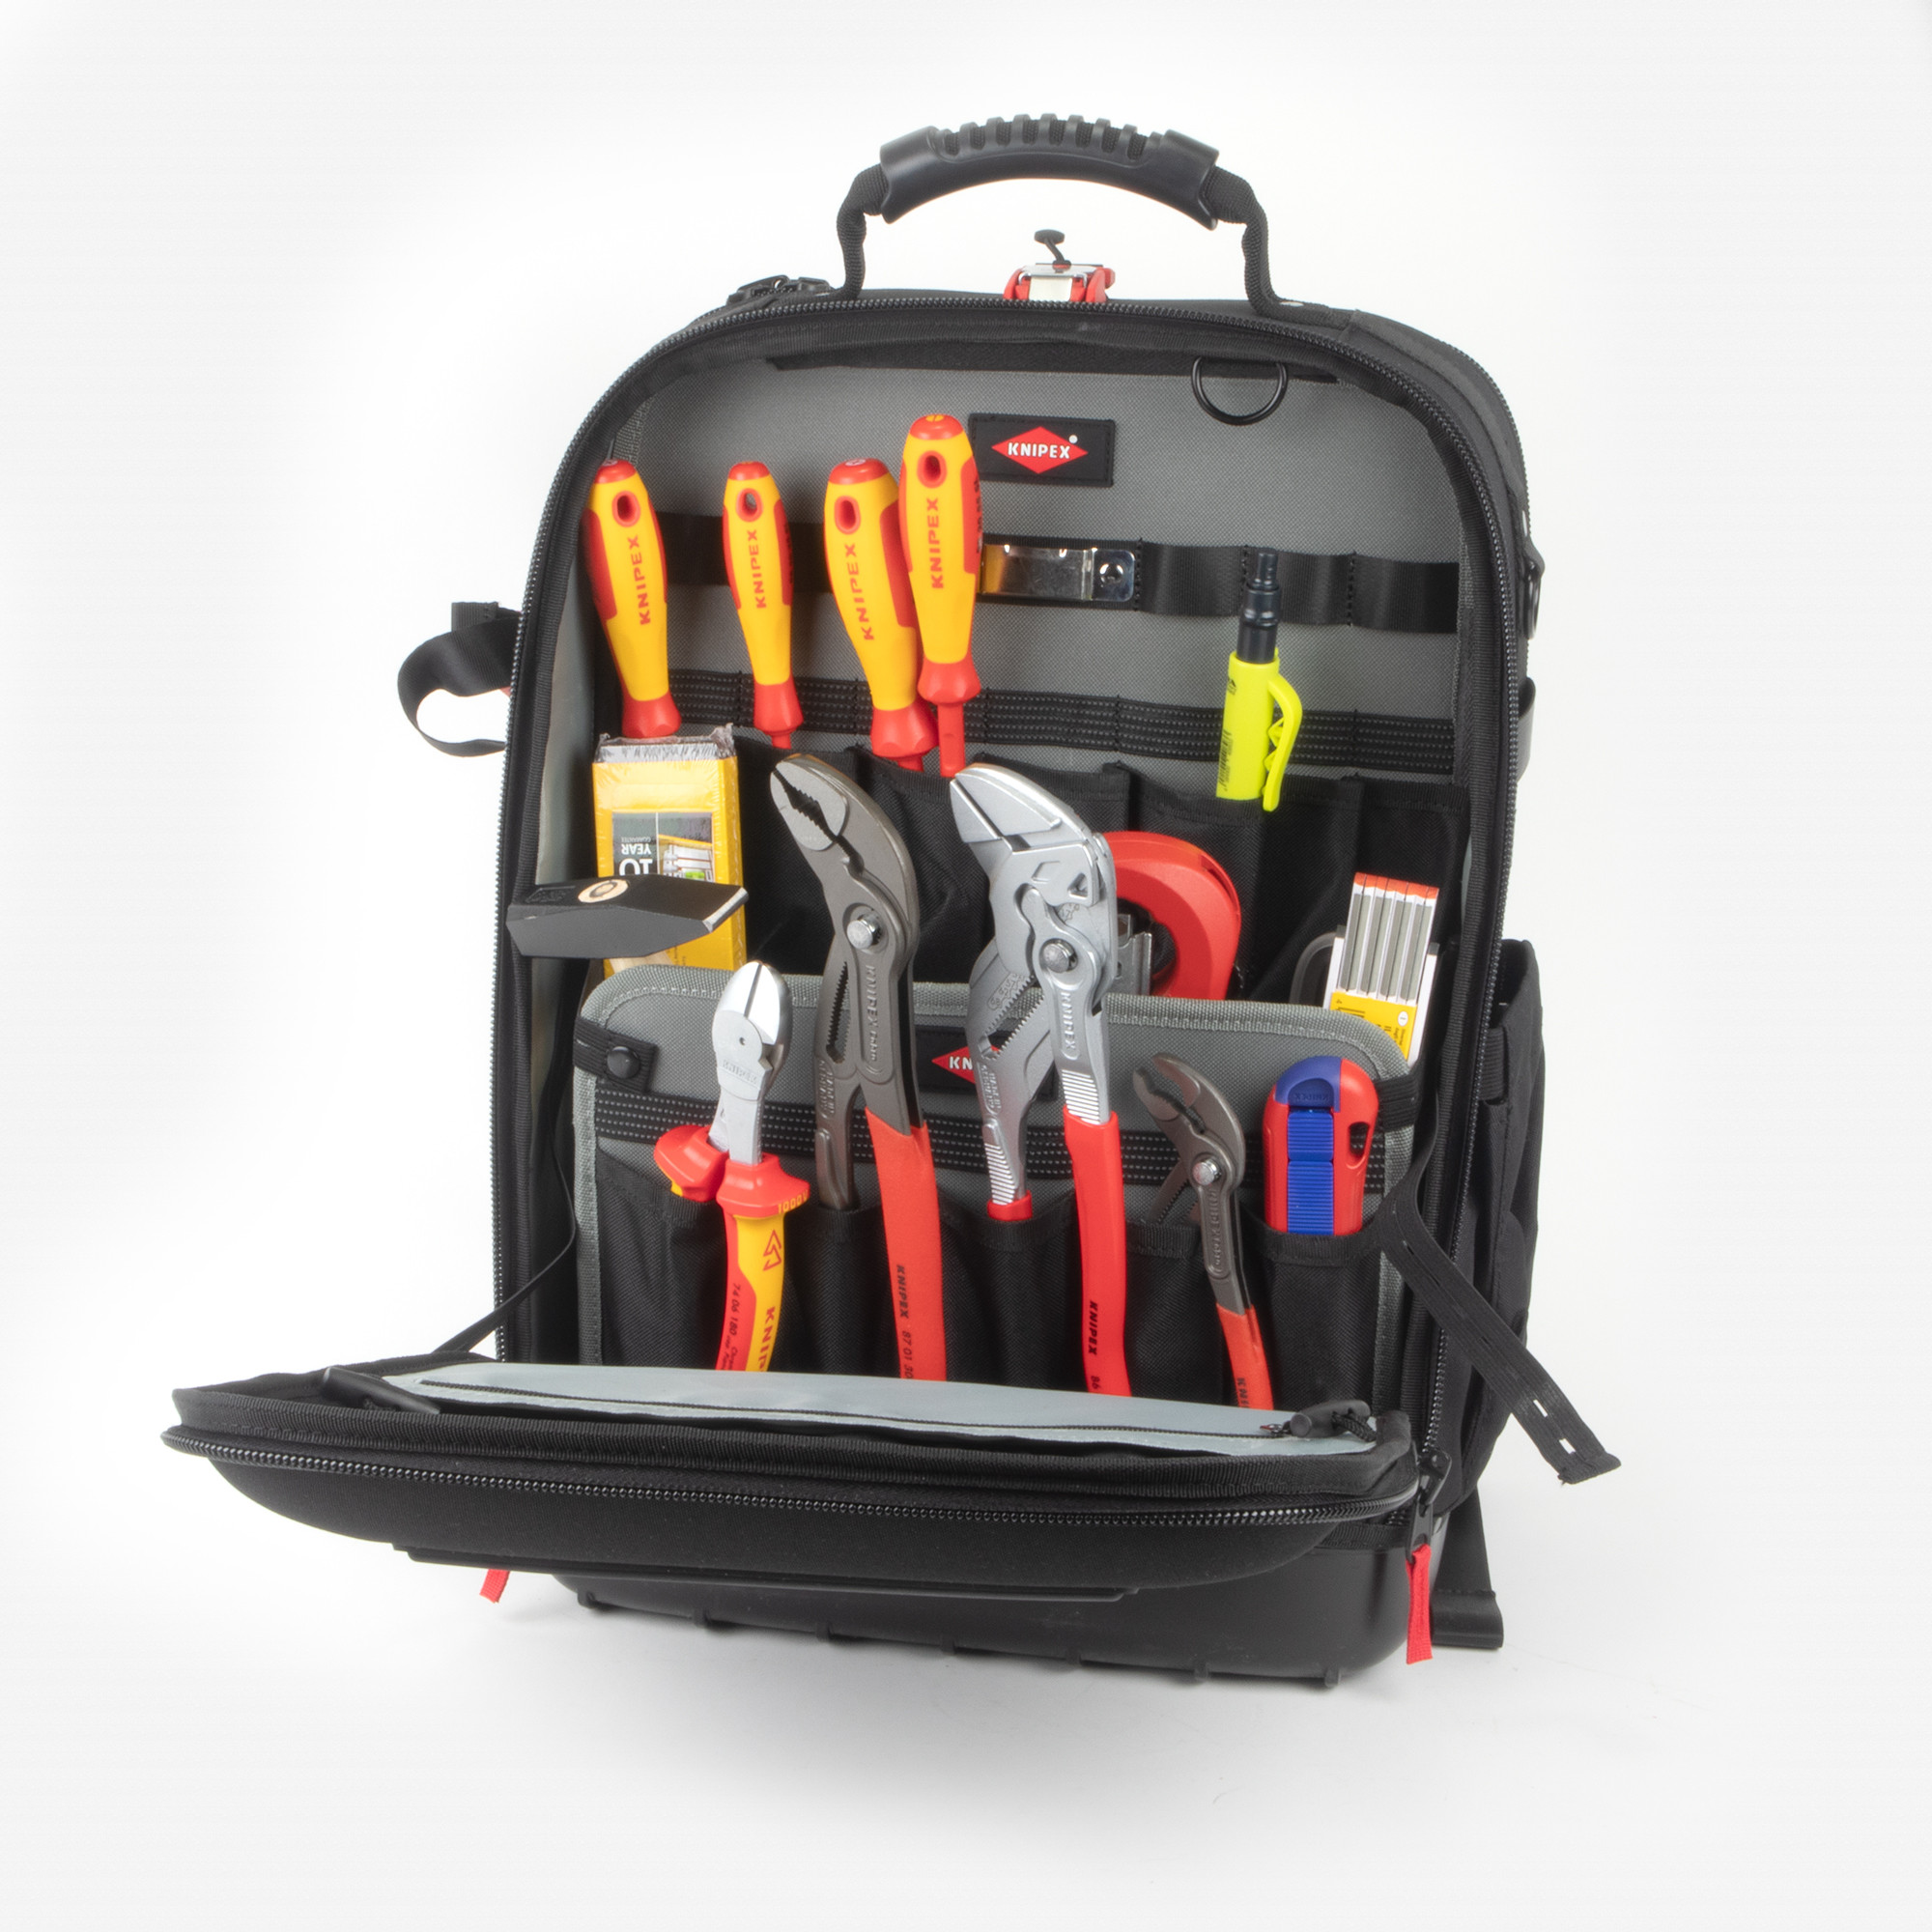 The PB Plumber tool bag: Coming (back) soon - PHPI Online